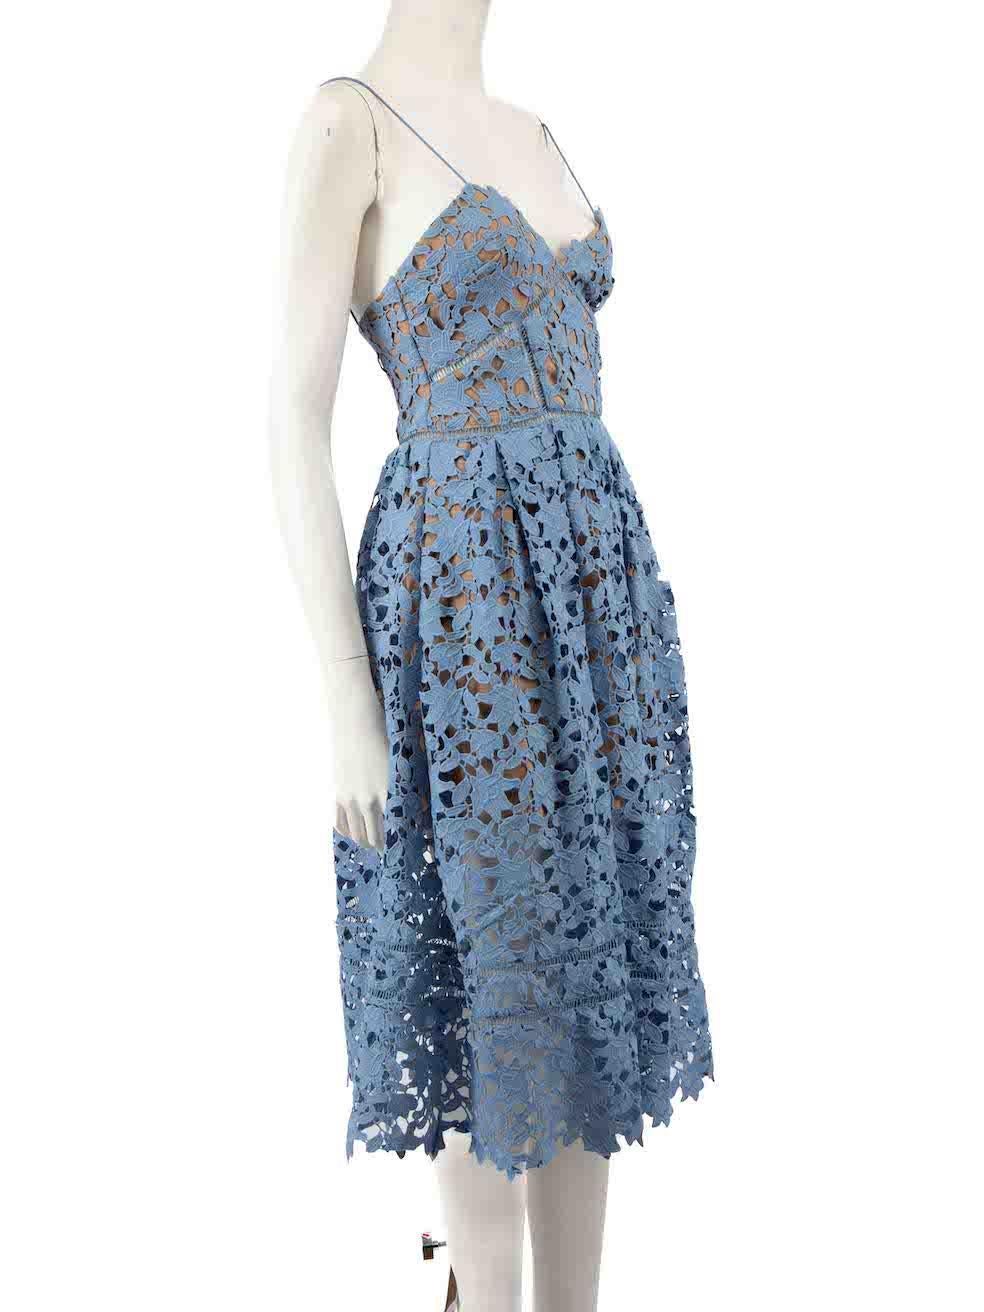 CONDITION is Never worn, with tags. No visible wear to dress is evident on this new Self-Portrait designer resale item.
 
 
 
 Details
 
 
 Azaelea model
 
 Blue
 
 Polyester
 
 Midi dress
 
 Floral lace accent
 
 Sleeveless
 
 See through detail on